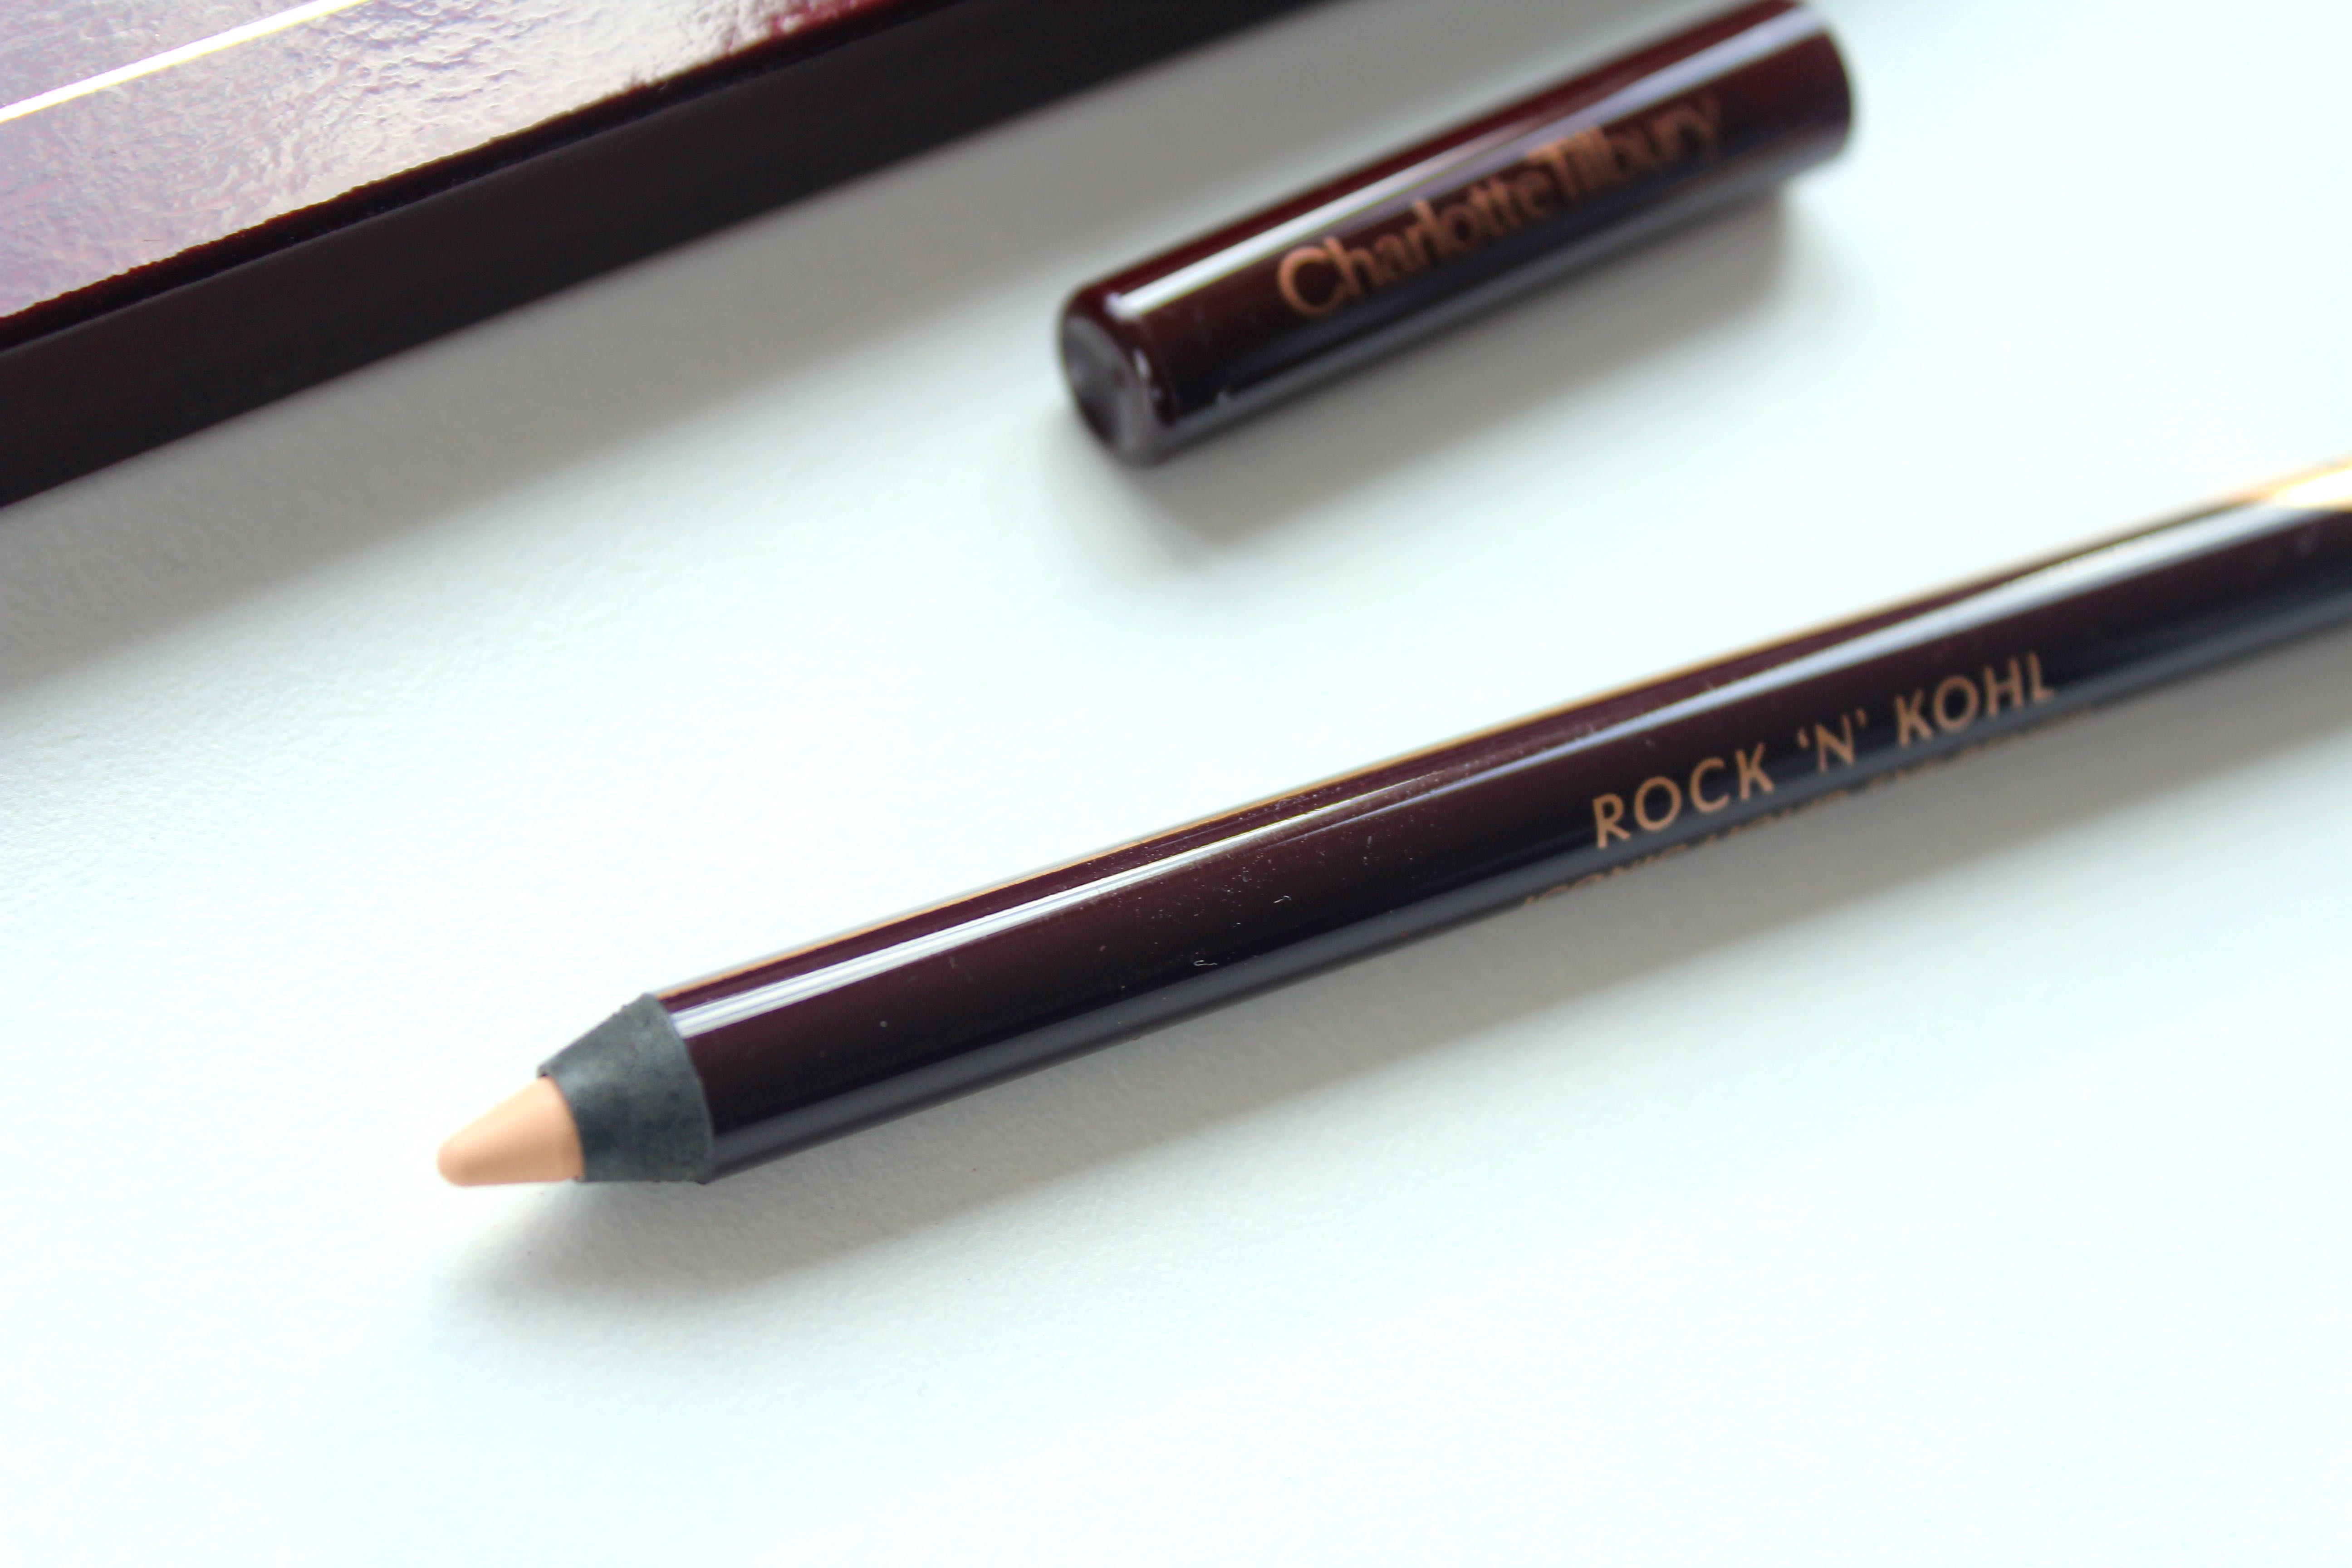 Charlotte-Tilbury-haul-and-product-review-all-in-one-Rock-'n'-kohl-iconic-liquid-eye-pencil-in-Eye-Cheat-by-face-made-up-facemadeup